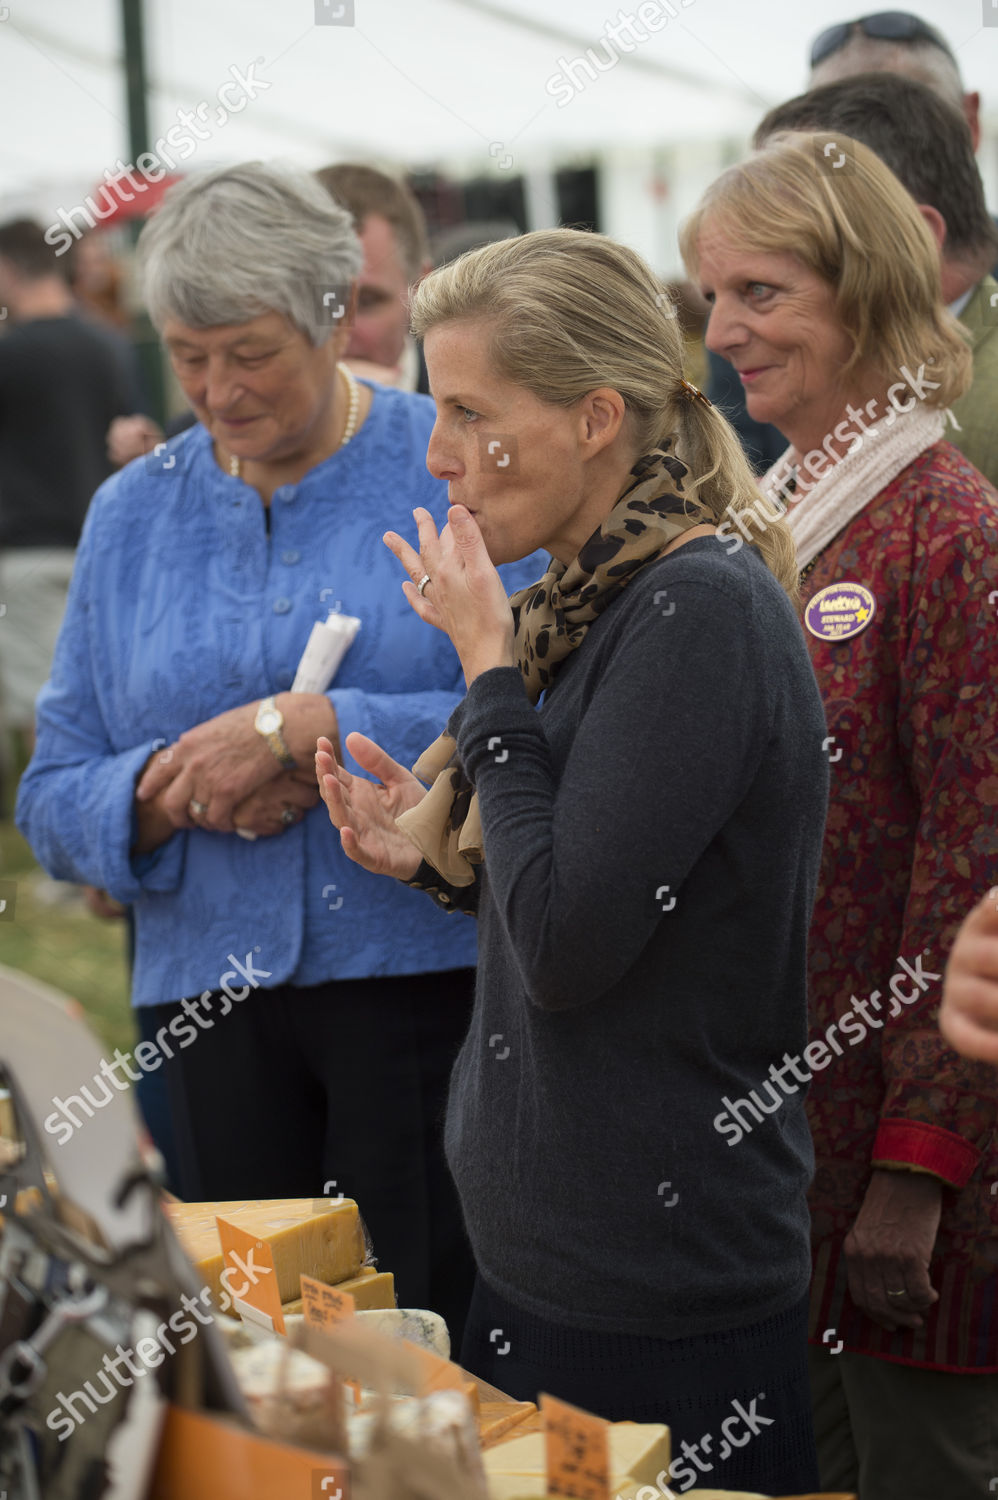 sophie-countess-of-wessex-and-prince-edward-visiting-frampton-country-fair-gloucestershire-britain-shutterstock-editorial-5074216ap.jpg